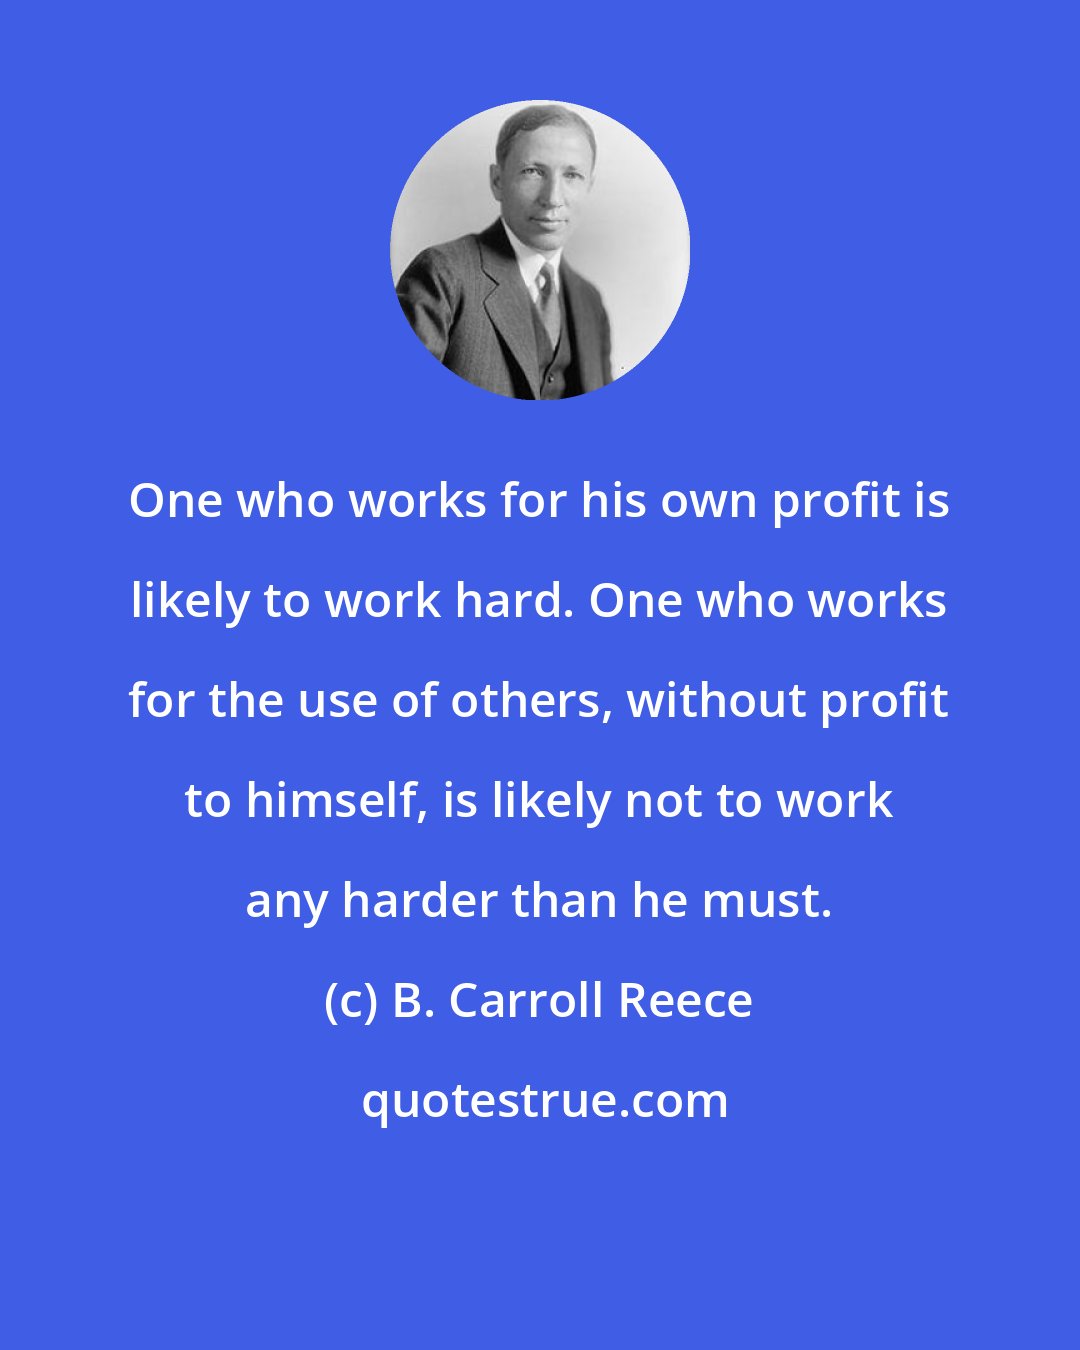 B. Carroll Reece: One who works for his own profit is likely to work hard. One who works for the use of others, without profit to himself, is likely not to work any harder than he must.